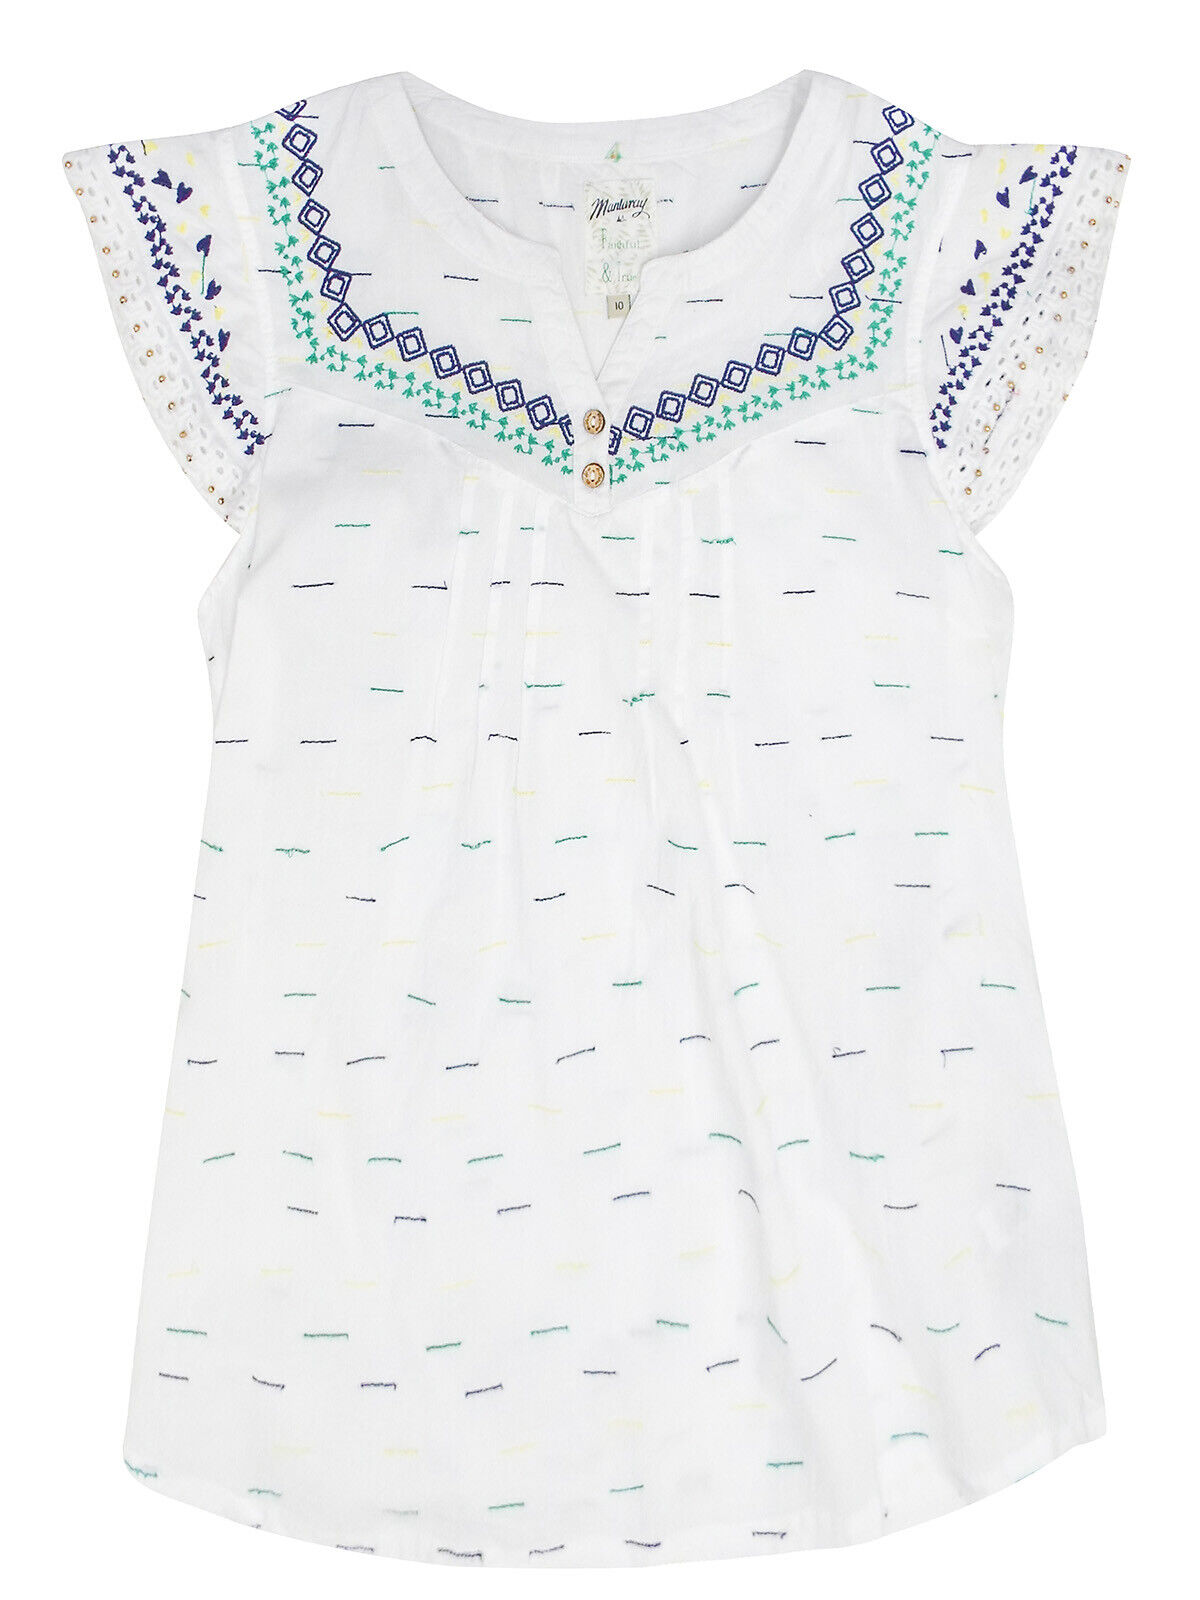 Mantaray White Pure Cotton Contrast Embroidered Top Sizes 10, 12, 14, 18, 20, 22